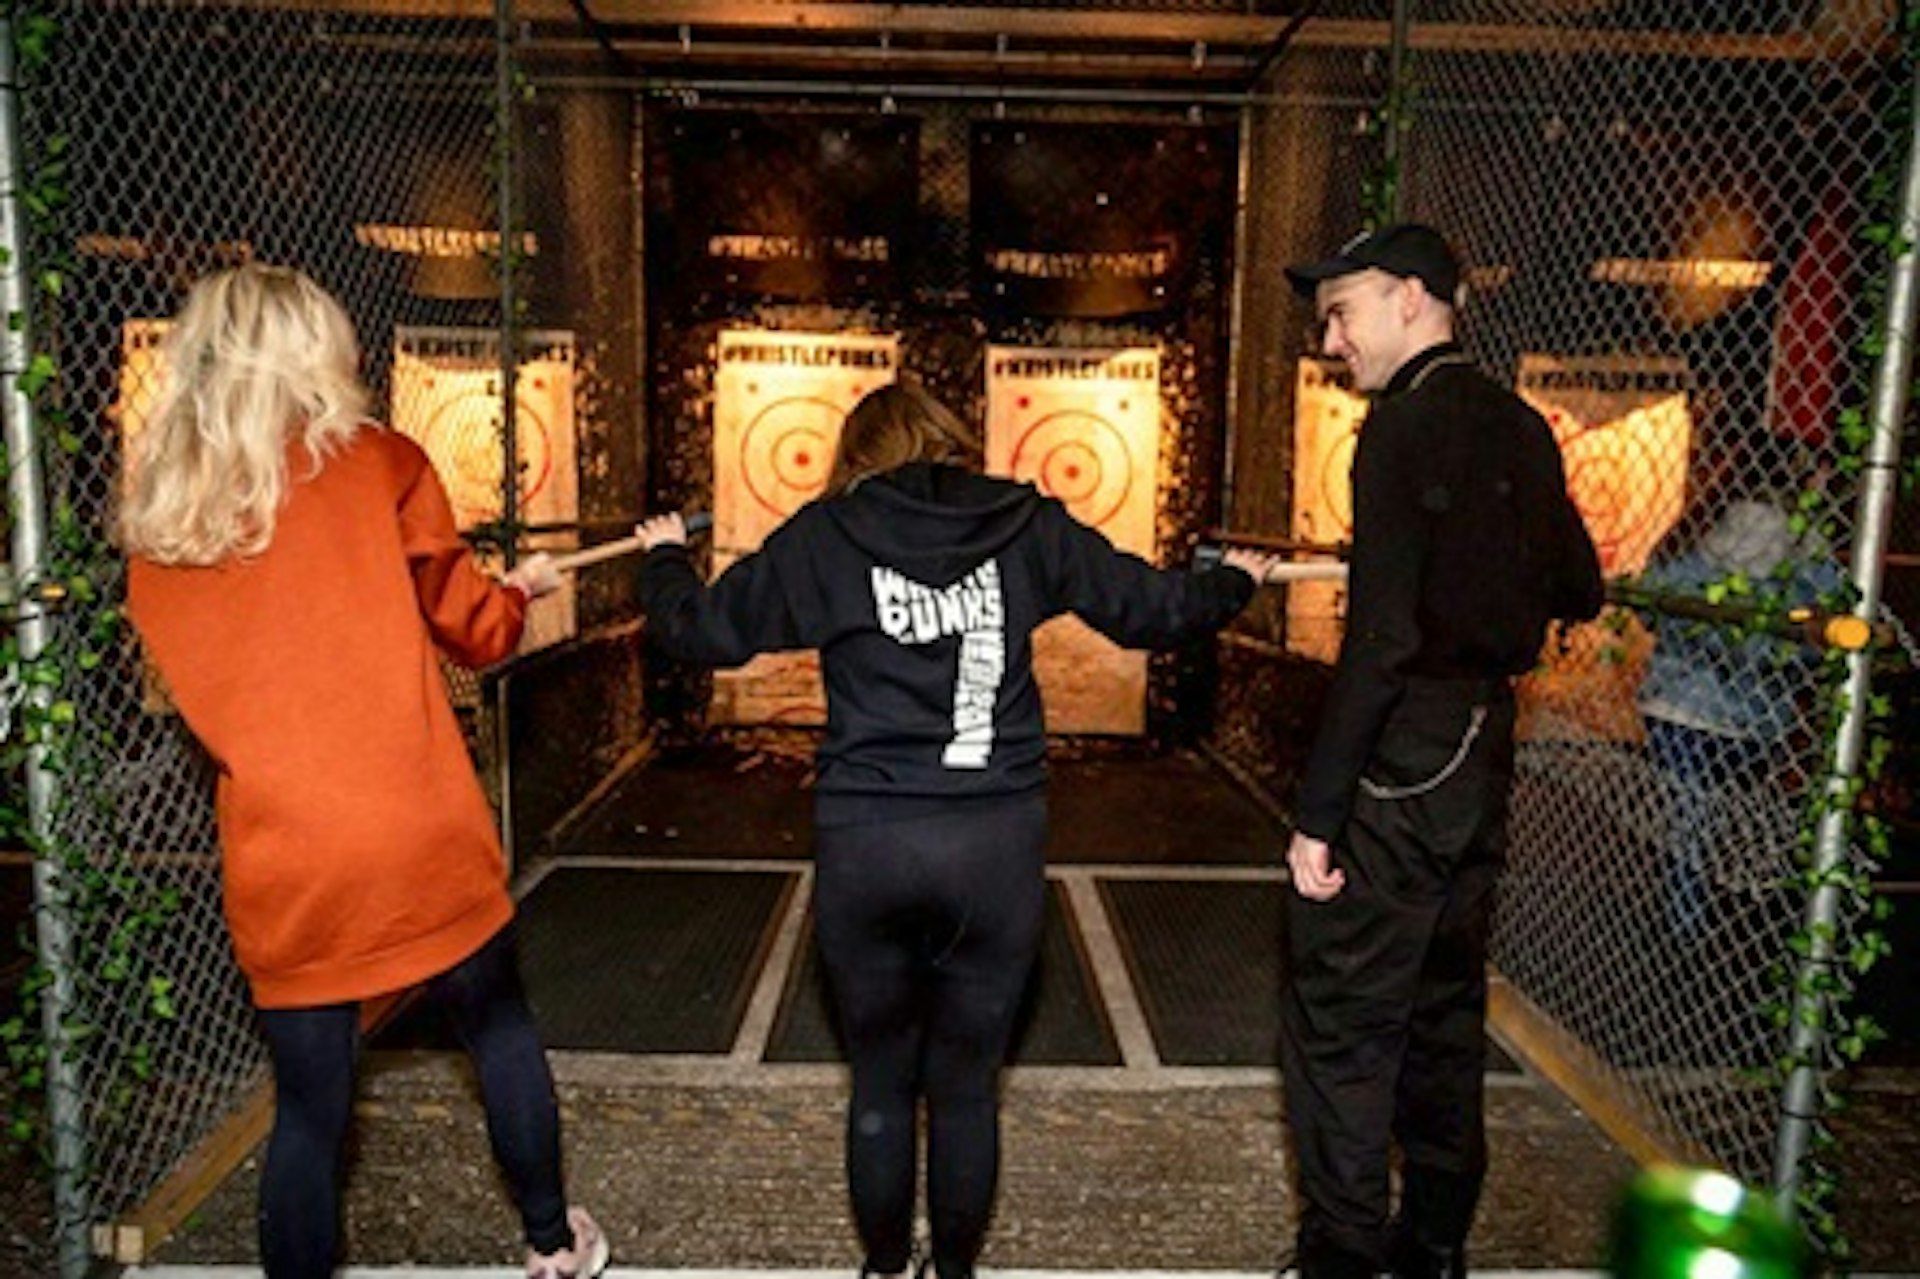 Urban Axe Throwing for Two at Whistle Punks, Leeds, Manchester or Bristol 3